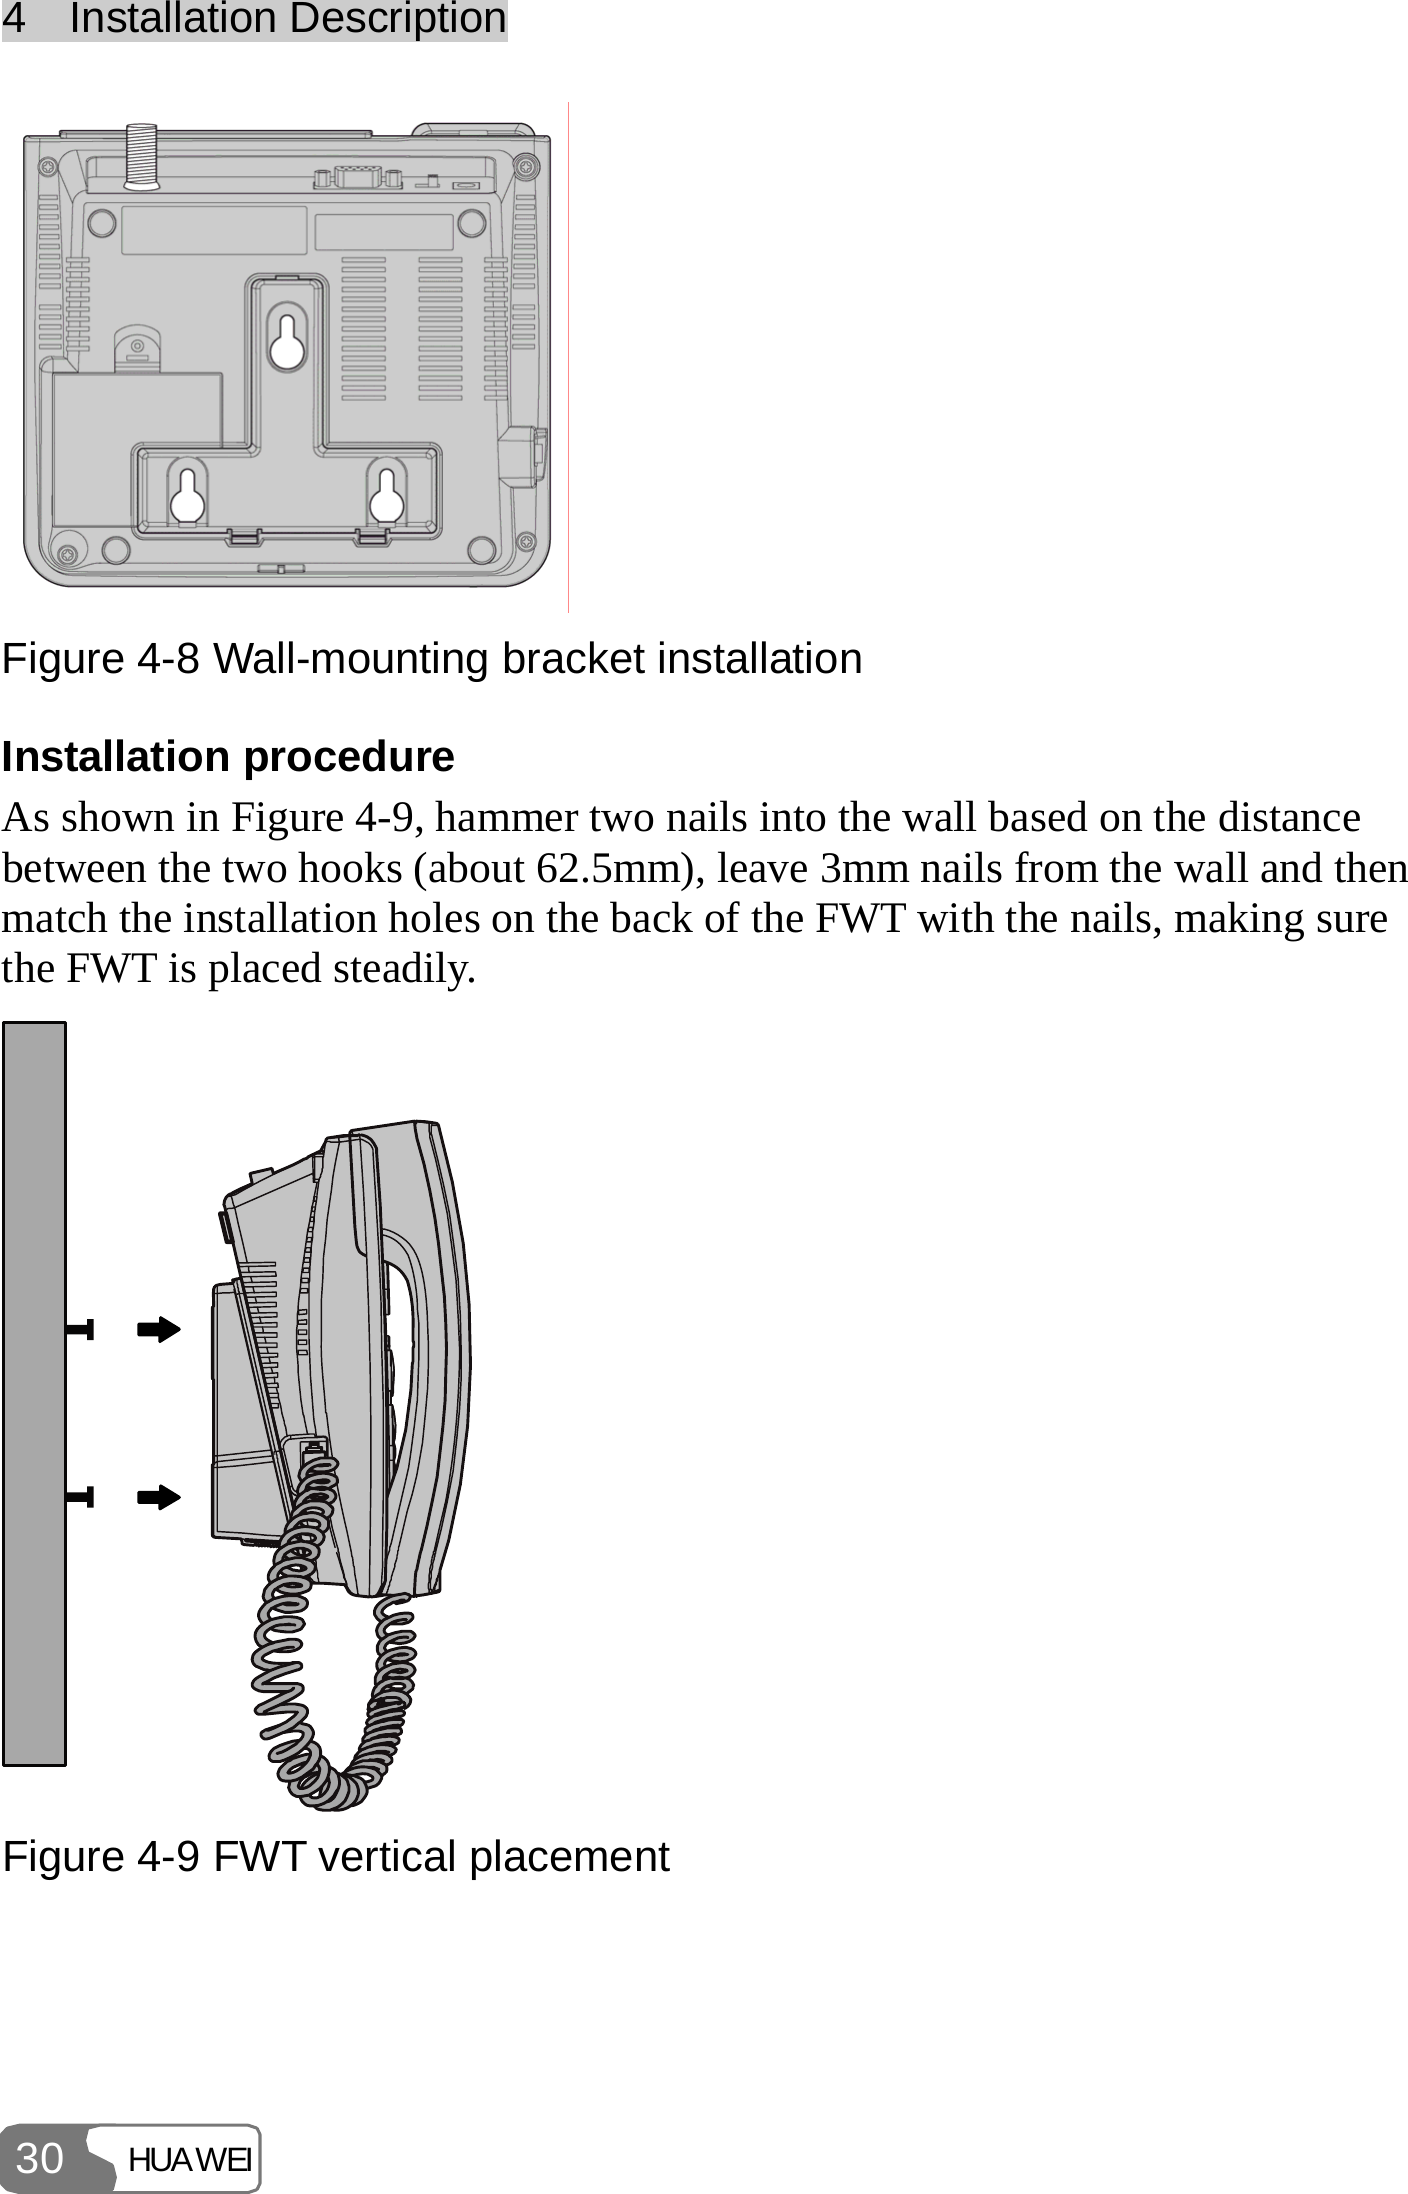 4  Installation Description HUAWEI 30  Figure 4-8 Wall-mounting bracket installation Installation procedure As shown in Figure 4-9, hammer two nails into the wall based on the distance between the two hooks (about 62.5mm), leave 3mm nails from the wall and then match the installation holes on the back of the FWT with the nails, making sure the FWT is placed steadily.  Figure 4-9 FWT vertical placement  